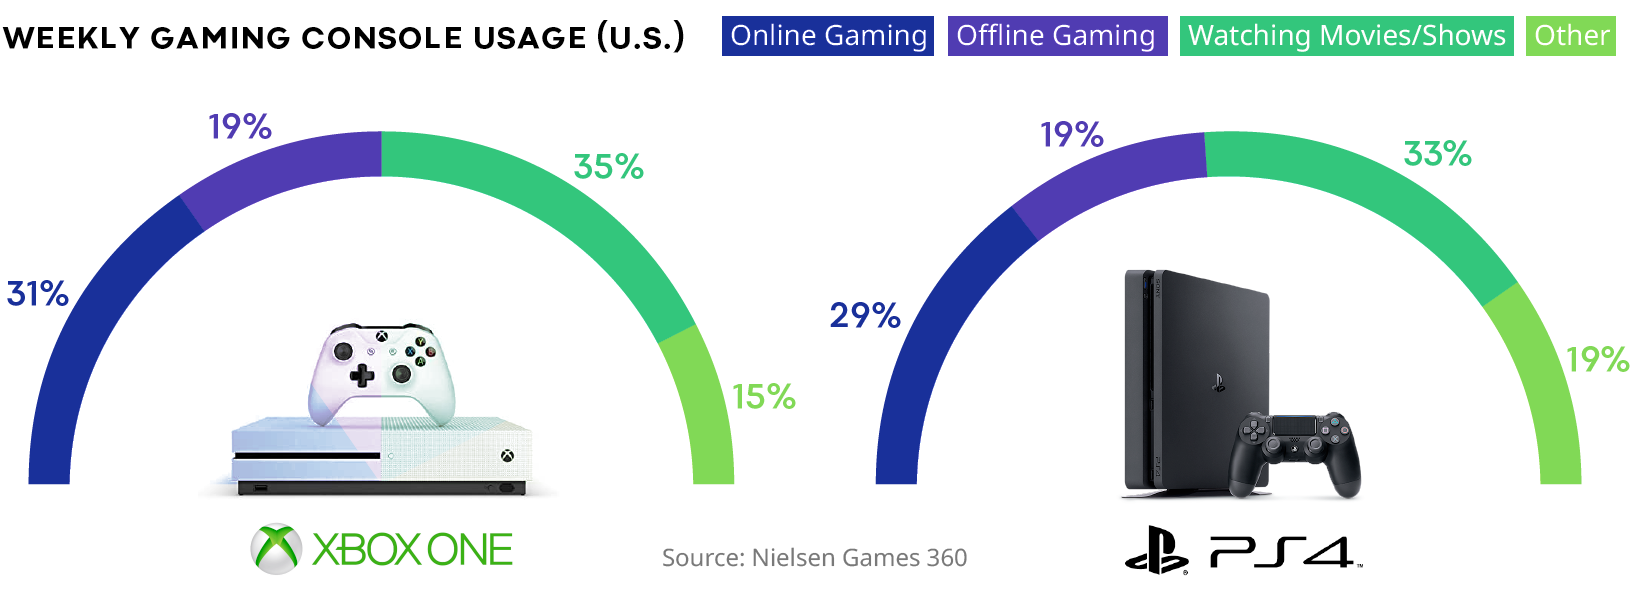 game consoles usage